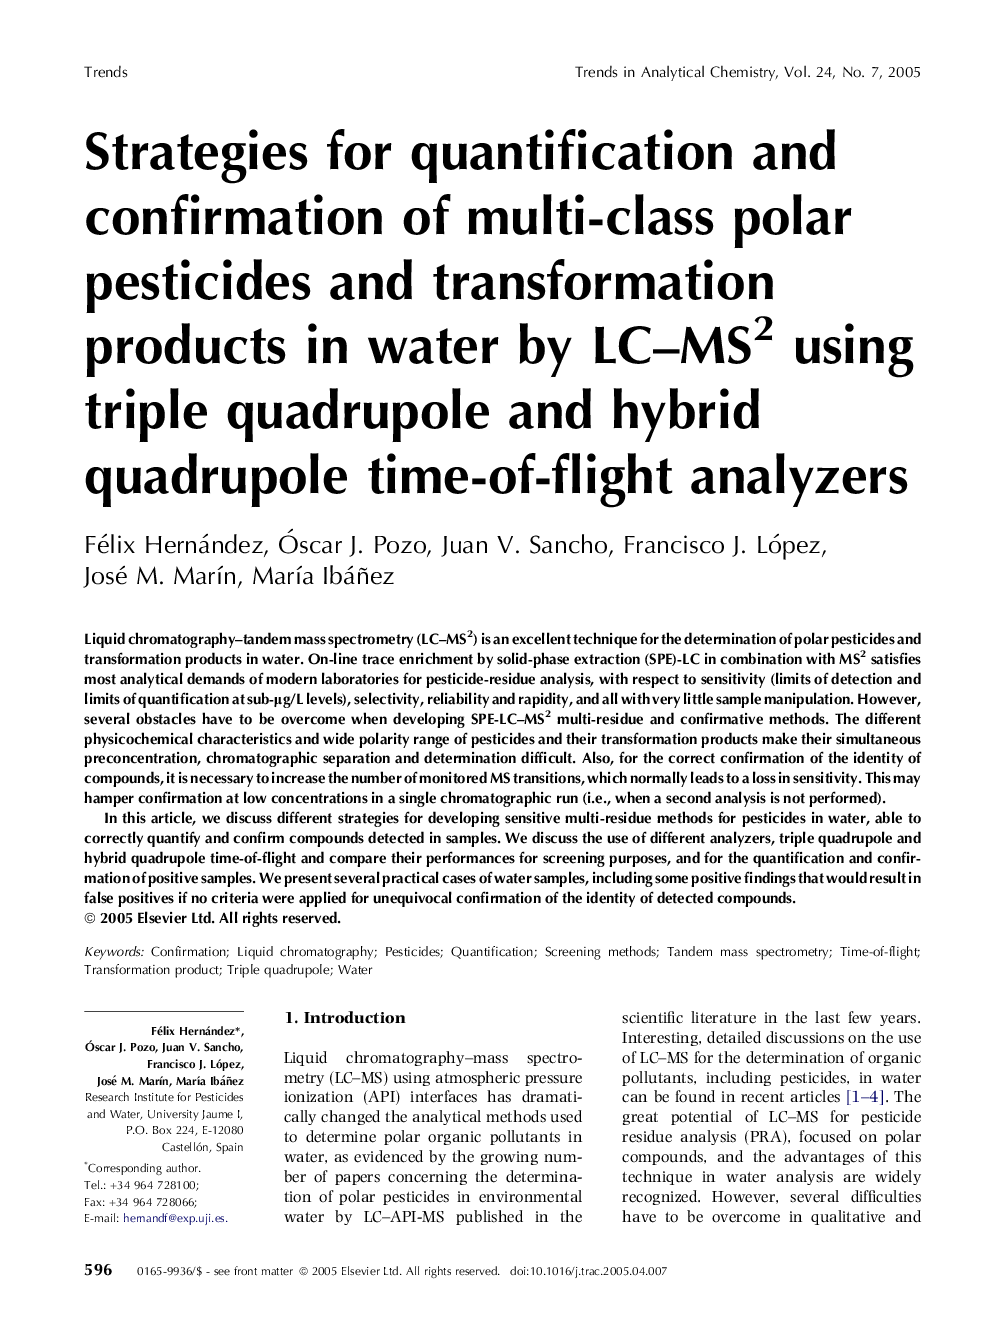 Strategies for quantification and confirmation of multi-class polar pesticides and transformation products in water by LC-MS2 using triple quadrupole and hybrid quadrupole time-of-flight analyzers